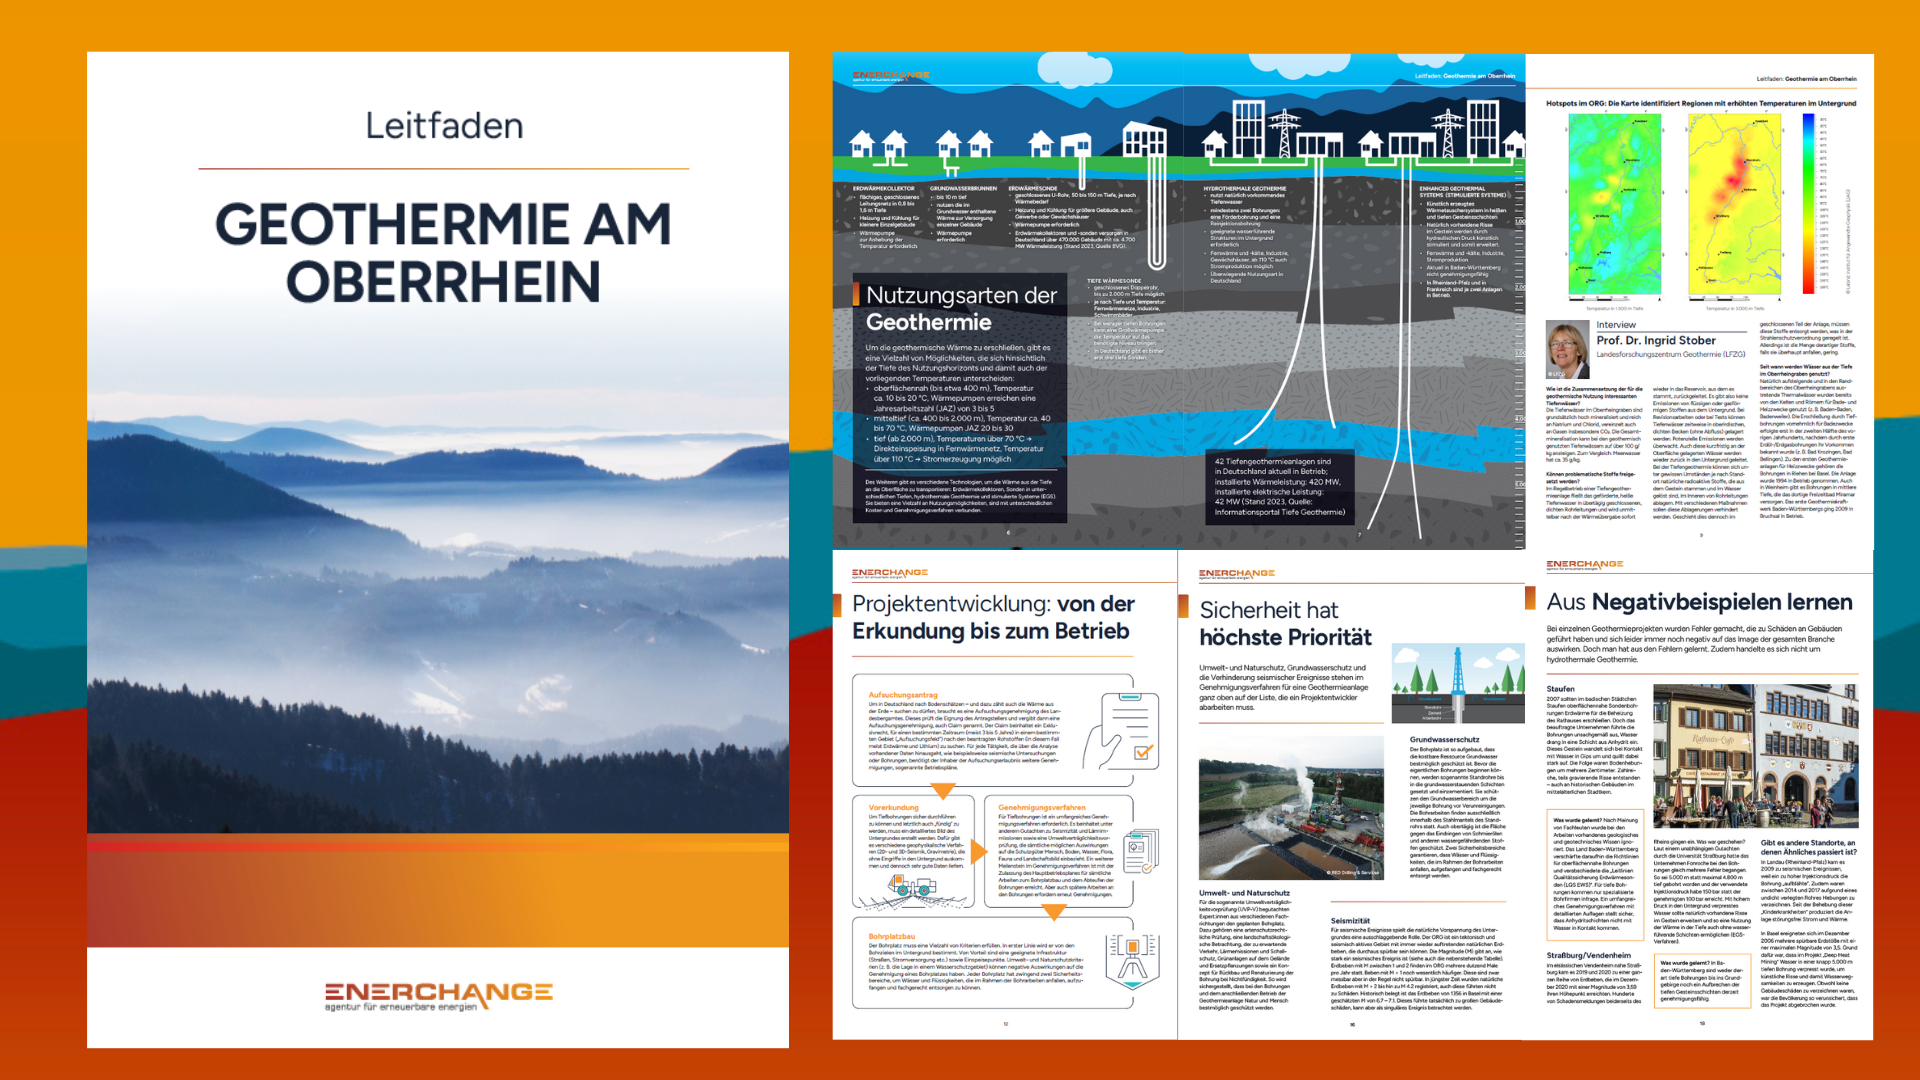 Guide to geothermal energy on the Upper Rhine